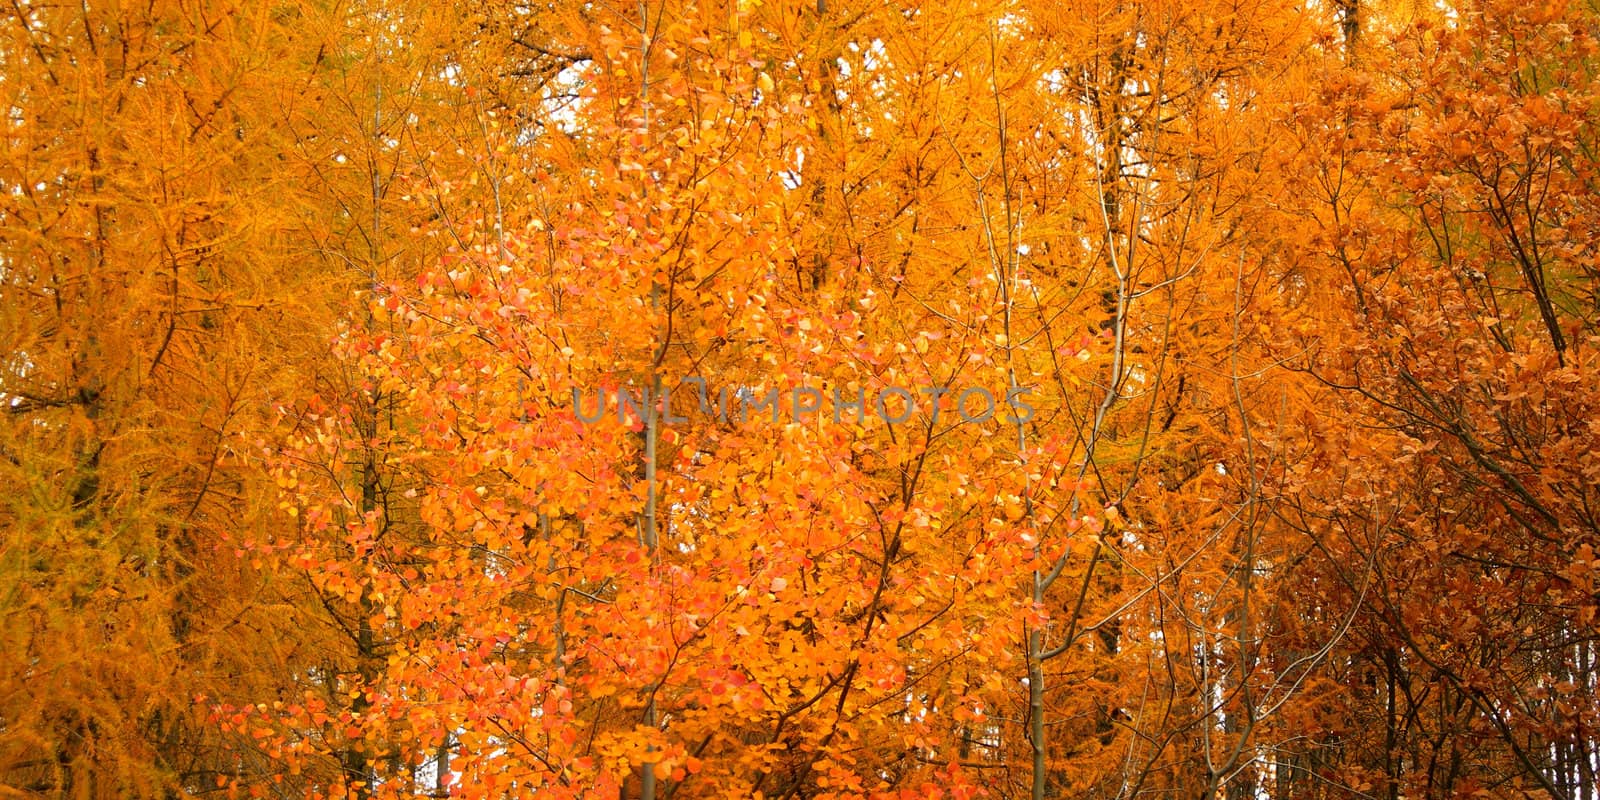 Bright and rich colors of trees in fall season